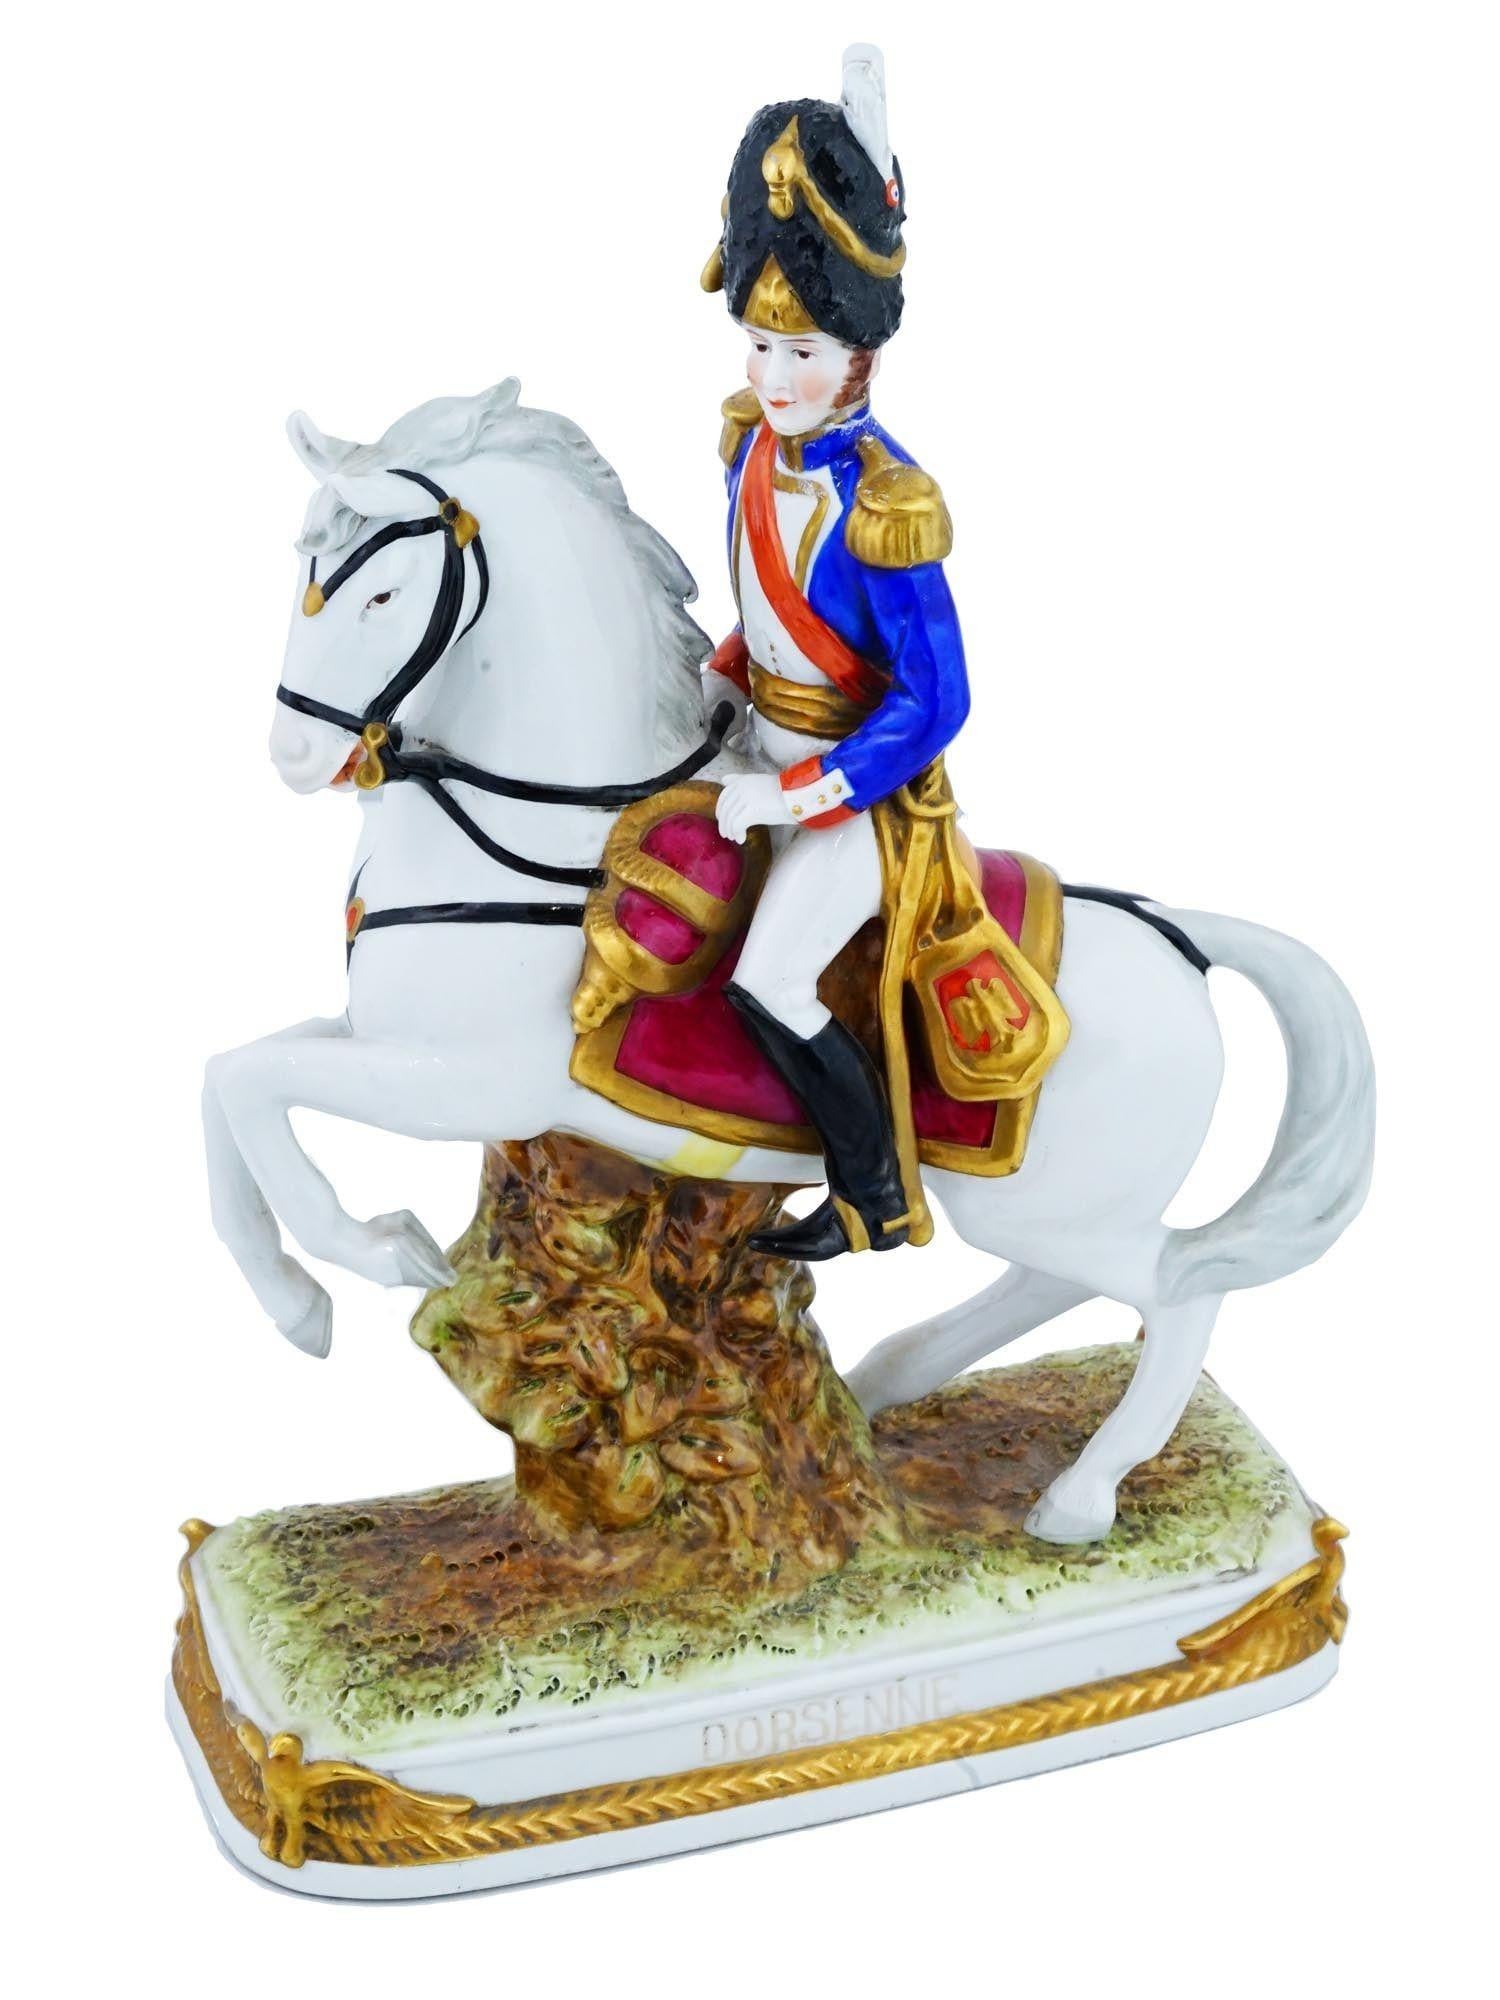 Vintage German porcelain figurine of a Napoleonic army officer on a white horse depicting Jean Marie Dorsenne count Lepaige, 1773 to 1812, a French military officer of the French Revolutionary Wars and the Napoleonic Wars.
From the Kister Porcelain